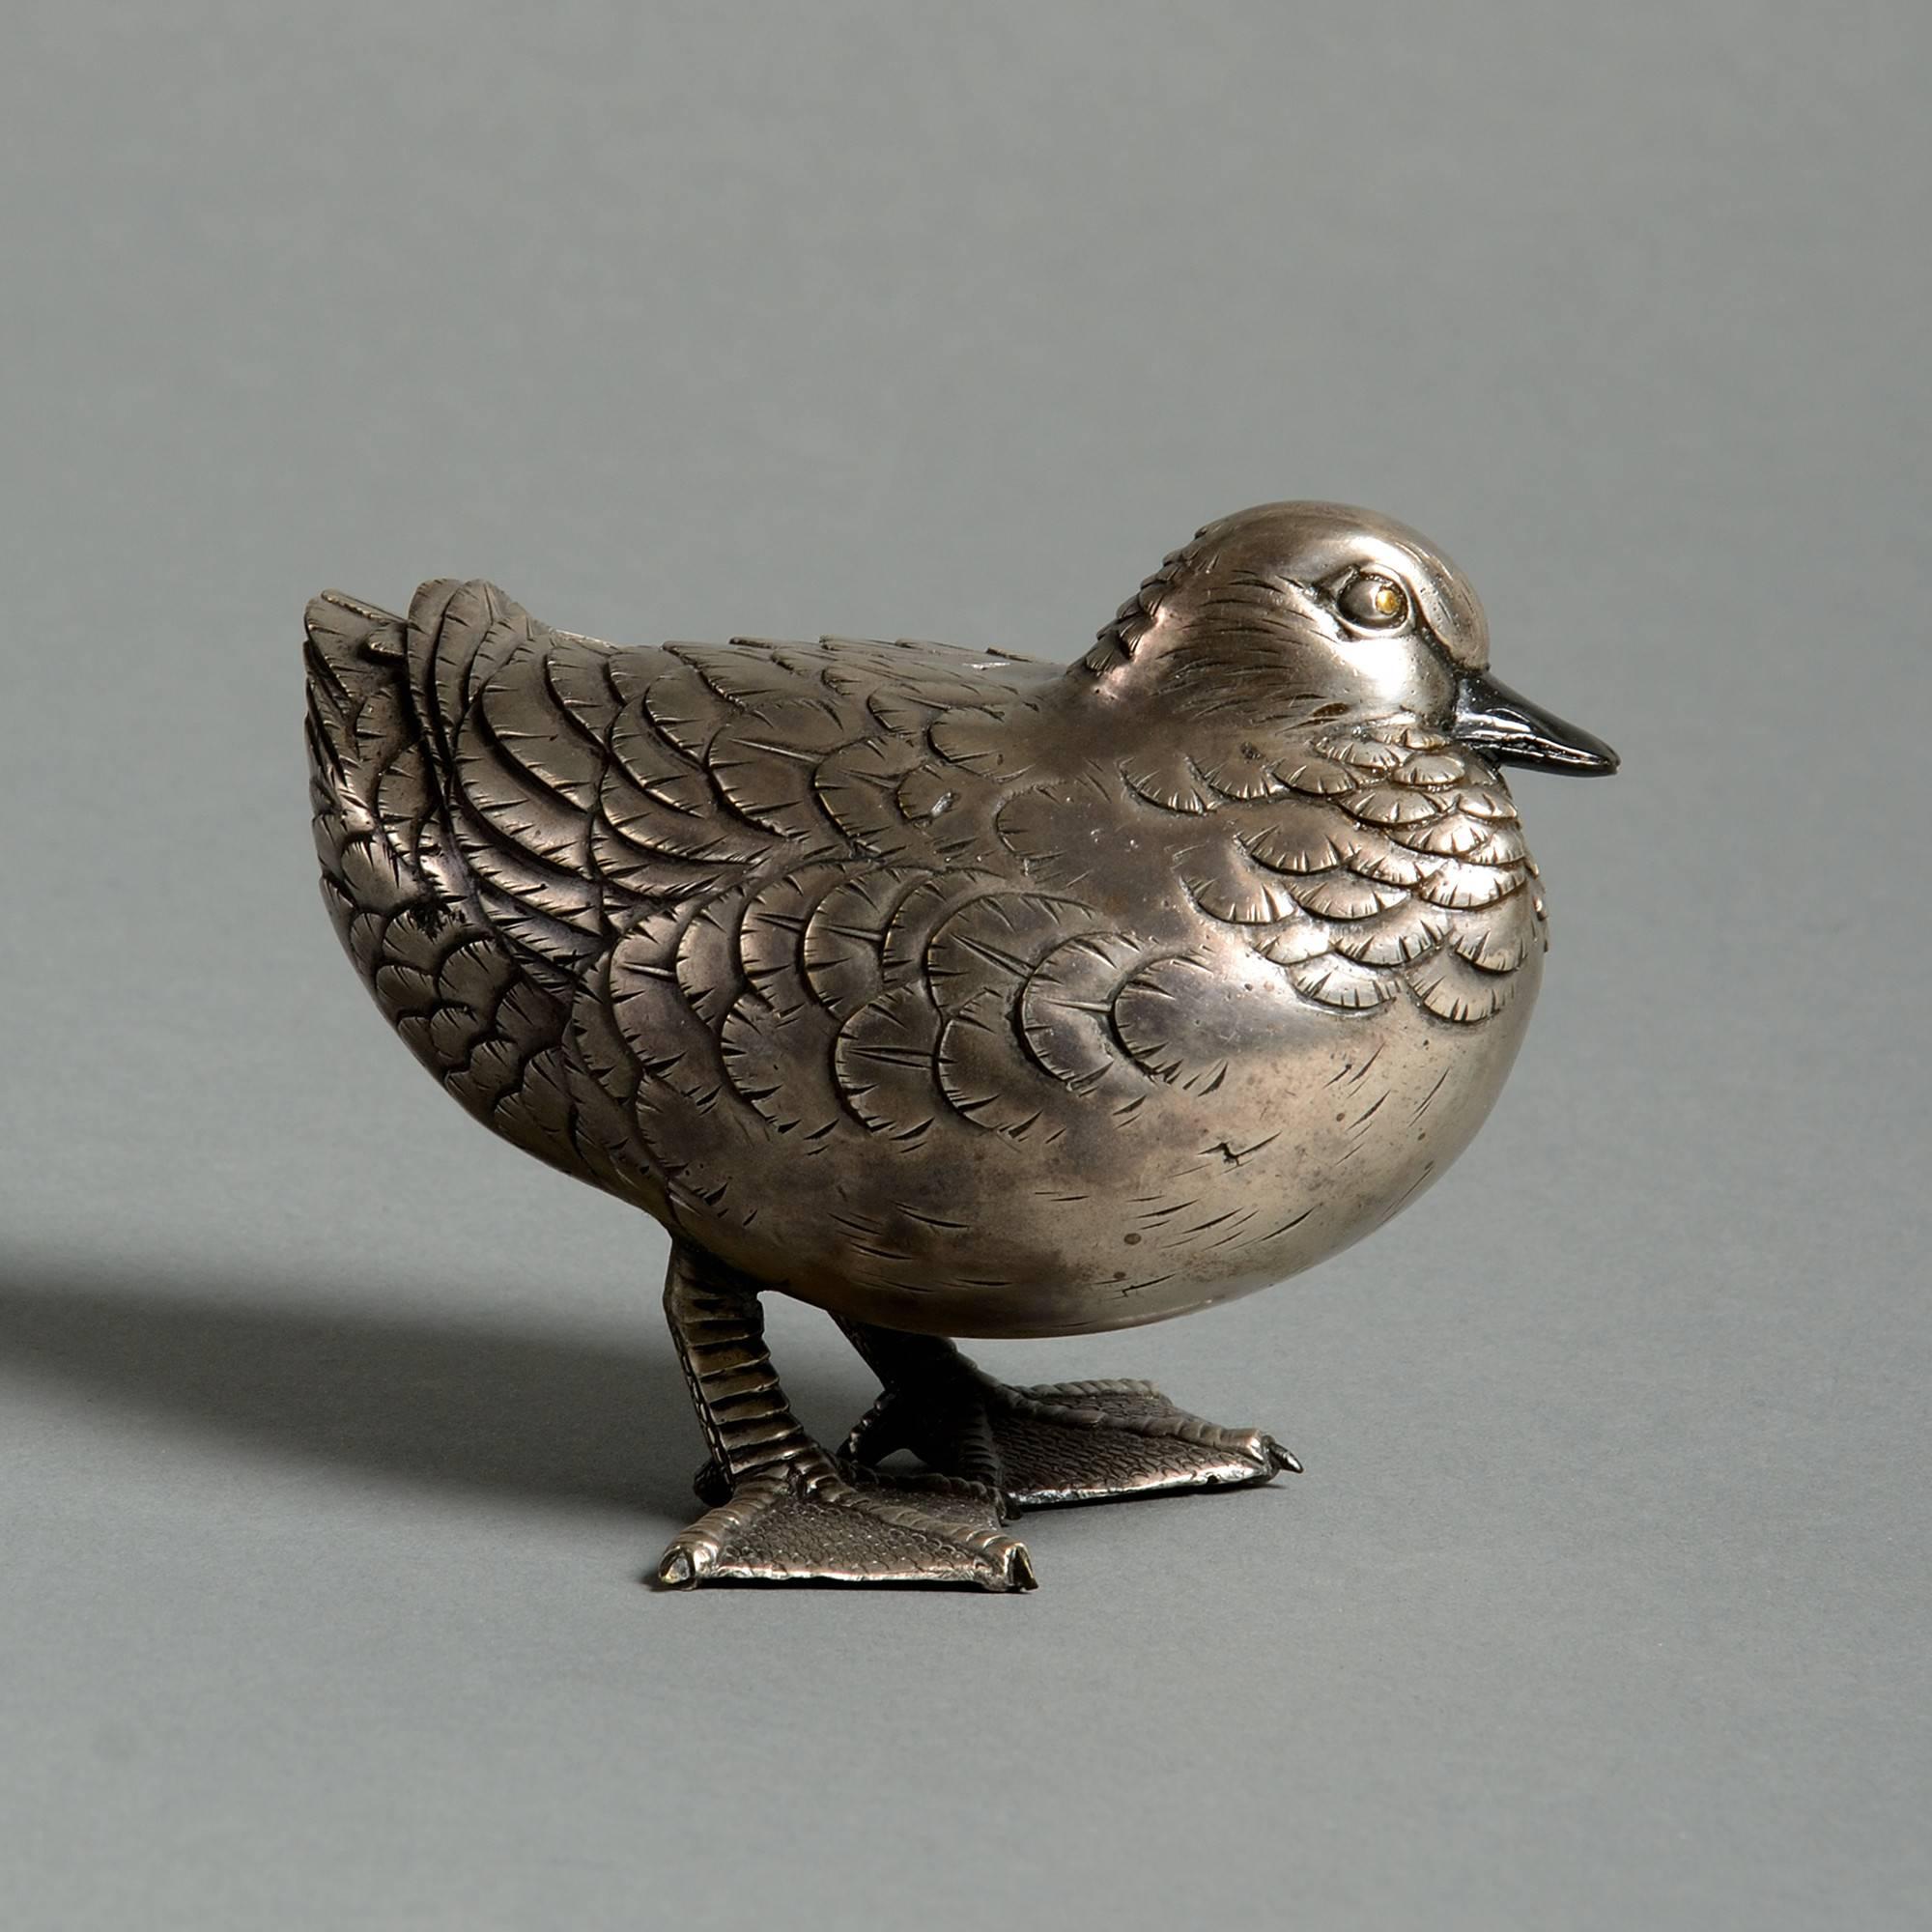 A finely cast and chased silver gilt bronze duck with inlaid eyes,

Meiji period (1868-1912).